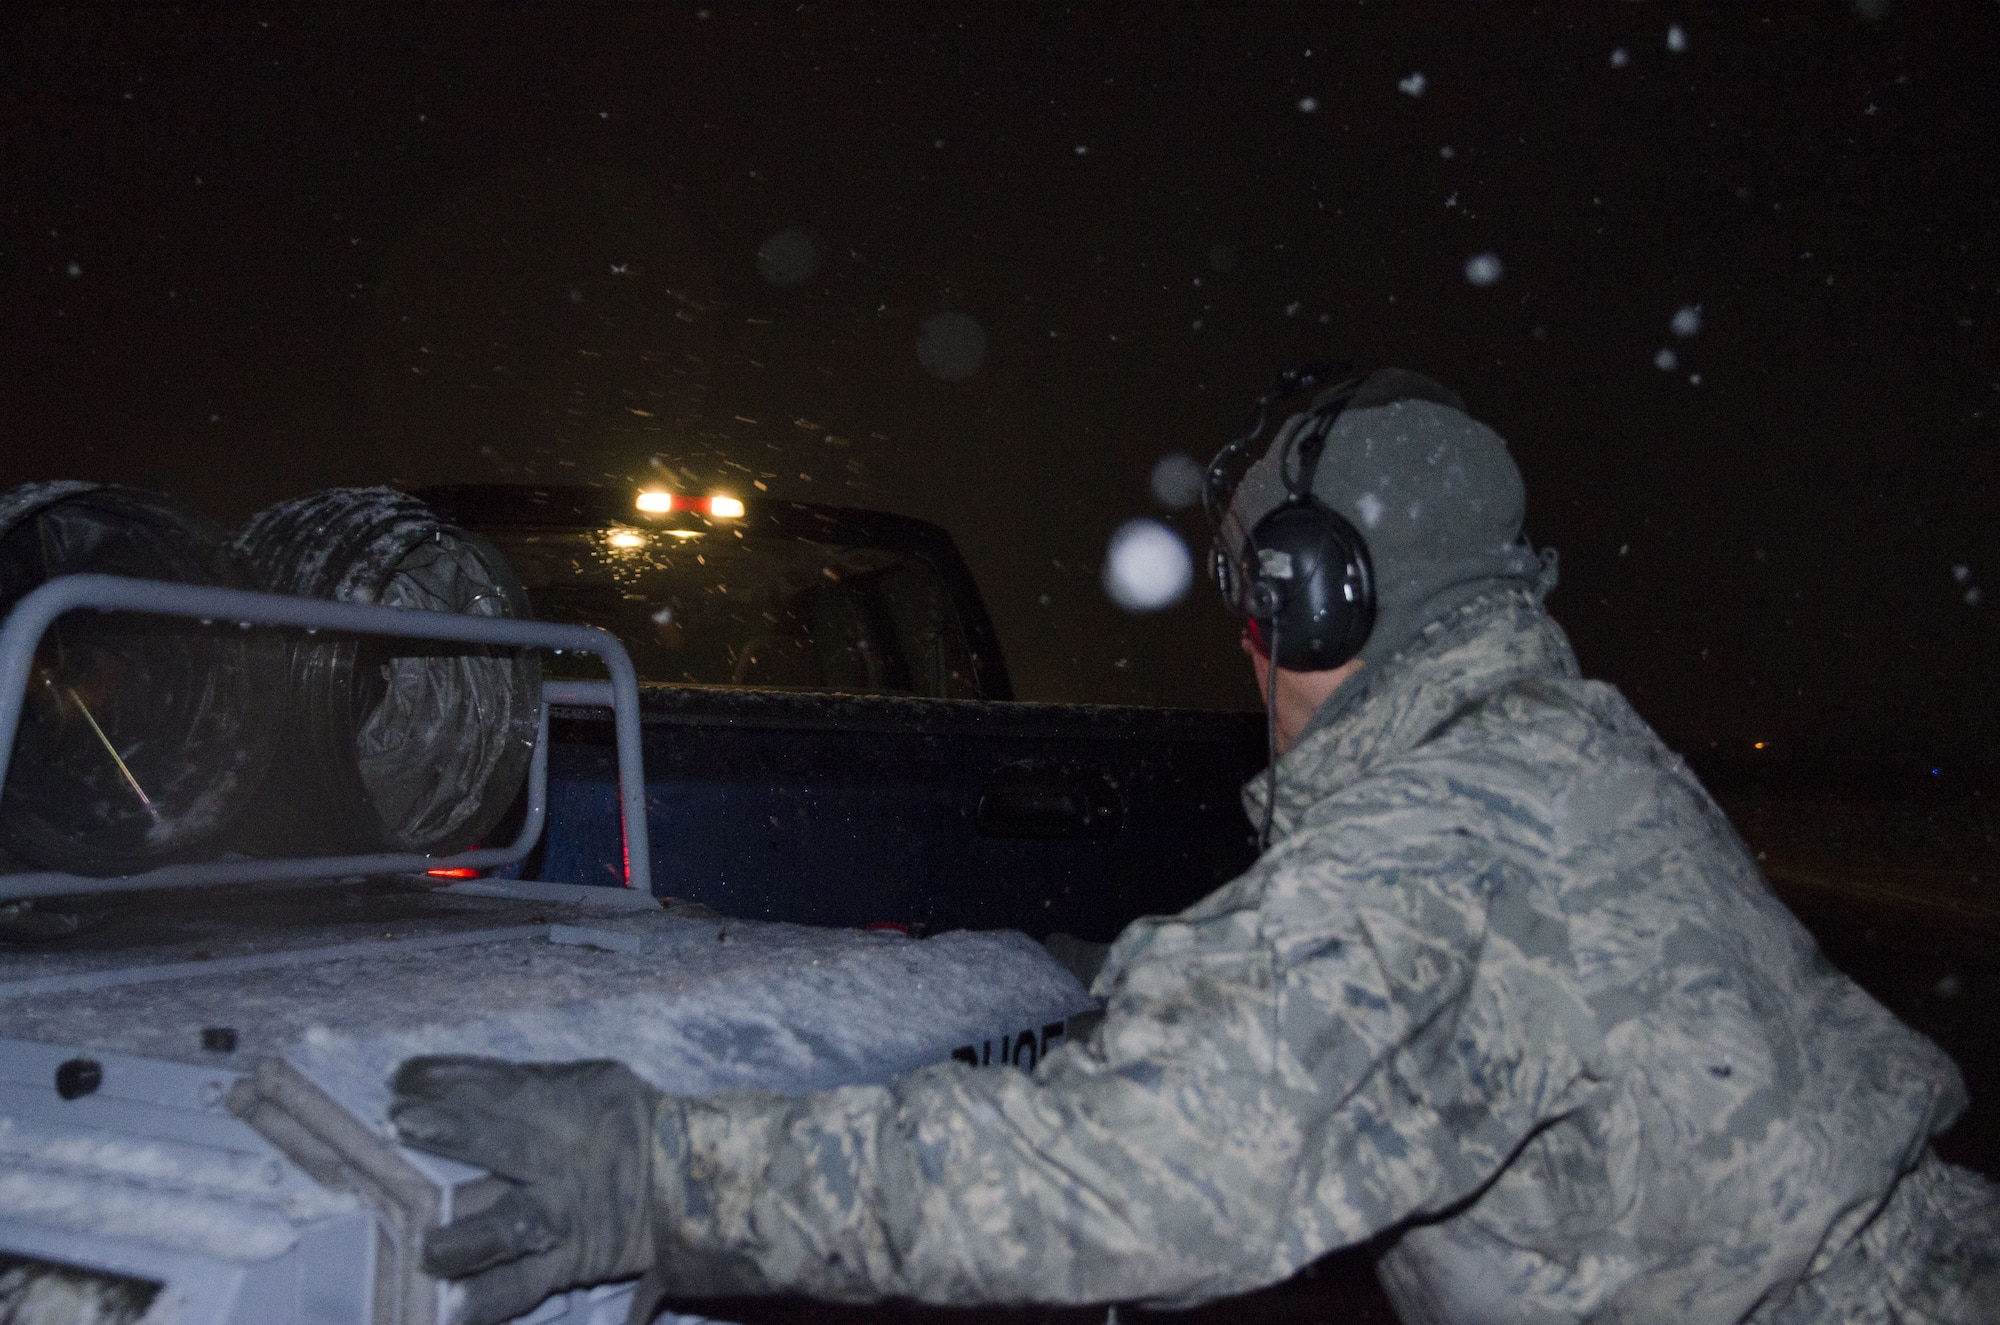 Snow falls as Master Sgt. Frank Diliberto, 108th KC-135R crew chief prepares a jet for the days flight at Joint Base McGuire-Dix-Lakehurst, N.J., Jan. 17, 2018. (U.S. Air National Guard photo by Staff Sgt. Ross A. Whitley)